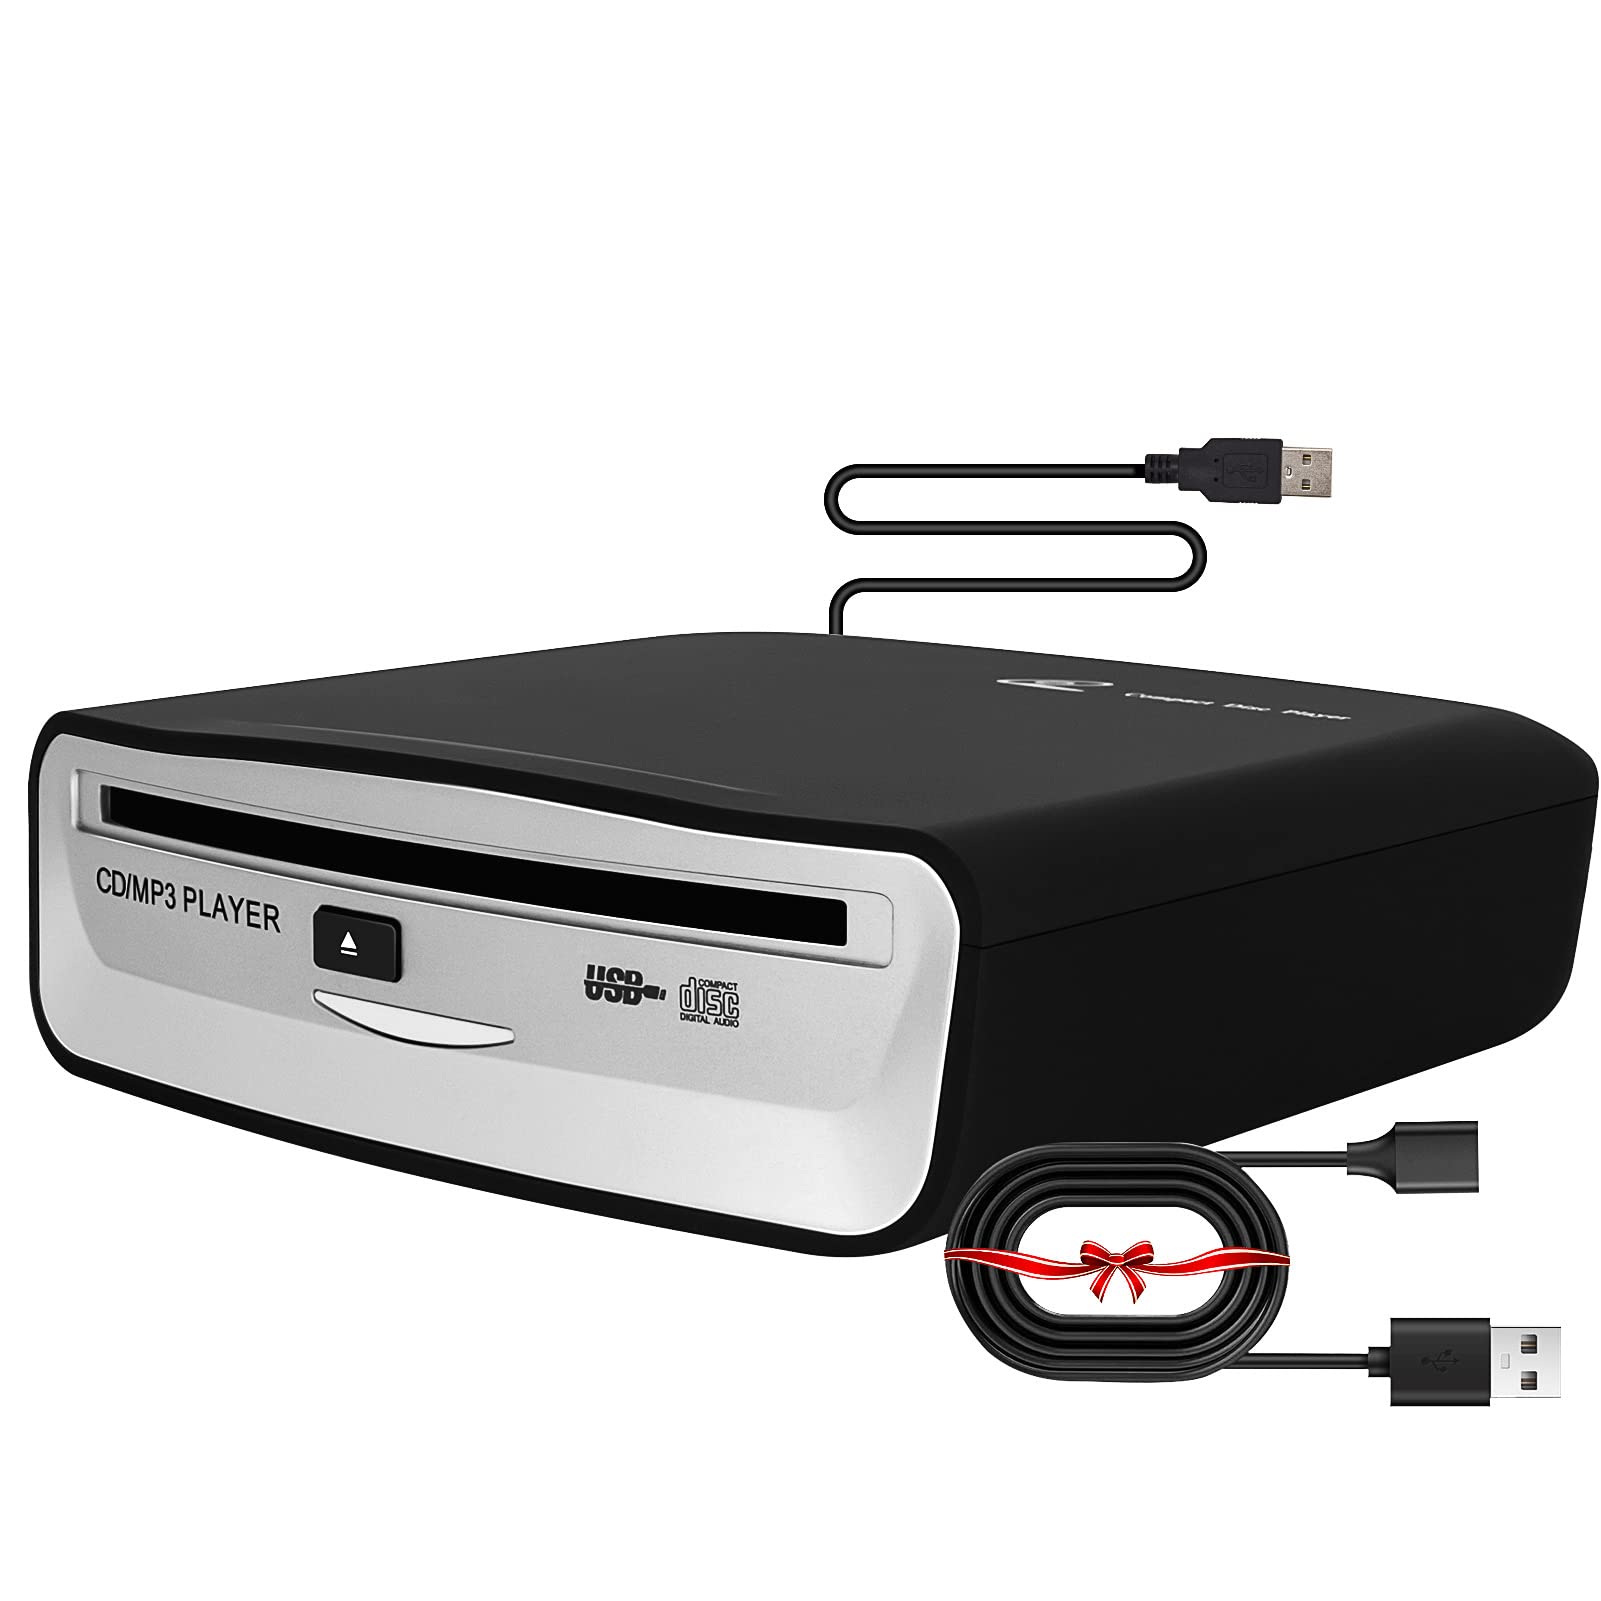 External Universal CD Player for Car - LEHWEY Portable CD Player with Extra USB Extension Cable, Plugs into Car USB Port, Laptop, TV, Mac, Computer, for Android 4.4 and Above Navigation